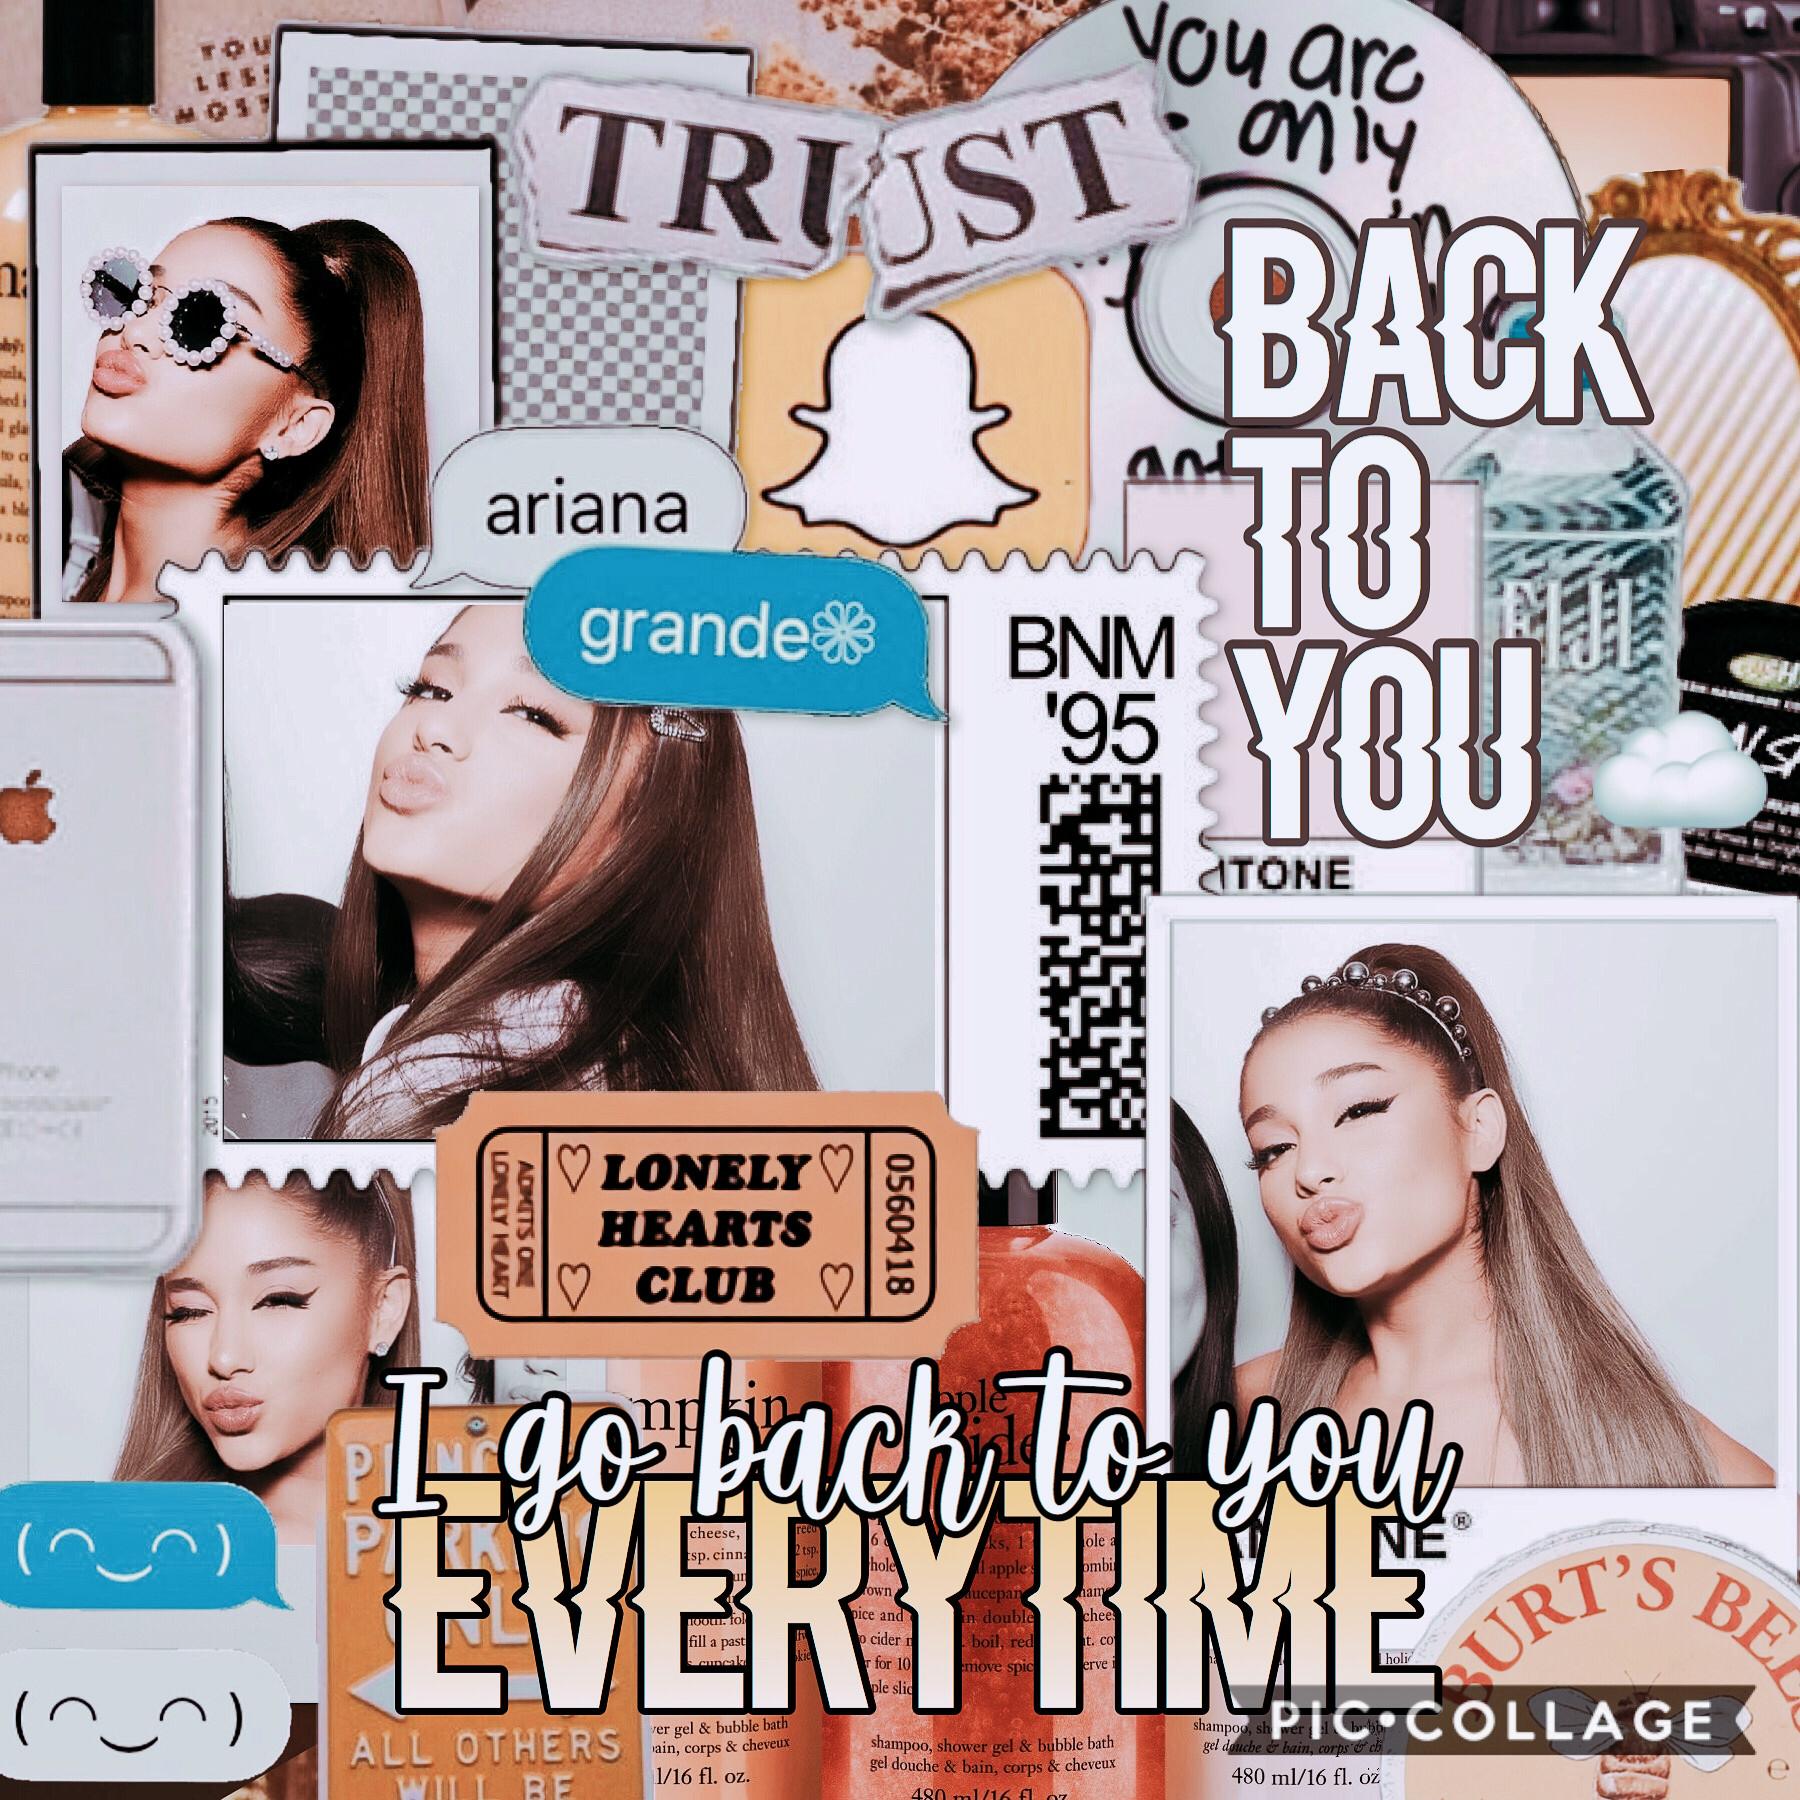 ☁️ t a p ! ☁️
🌙 this might be my first Ariana collage? I don’t remember but I think it is
🌙 I did my favorite Ariana song for this collage : everytime 💗
🌙 qotd: favorite food?
🌙 aotd: idk I like anything with chickeN 🤭🤠🤠🤠